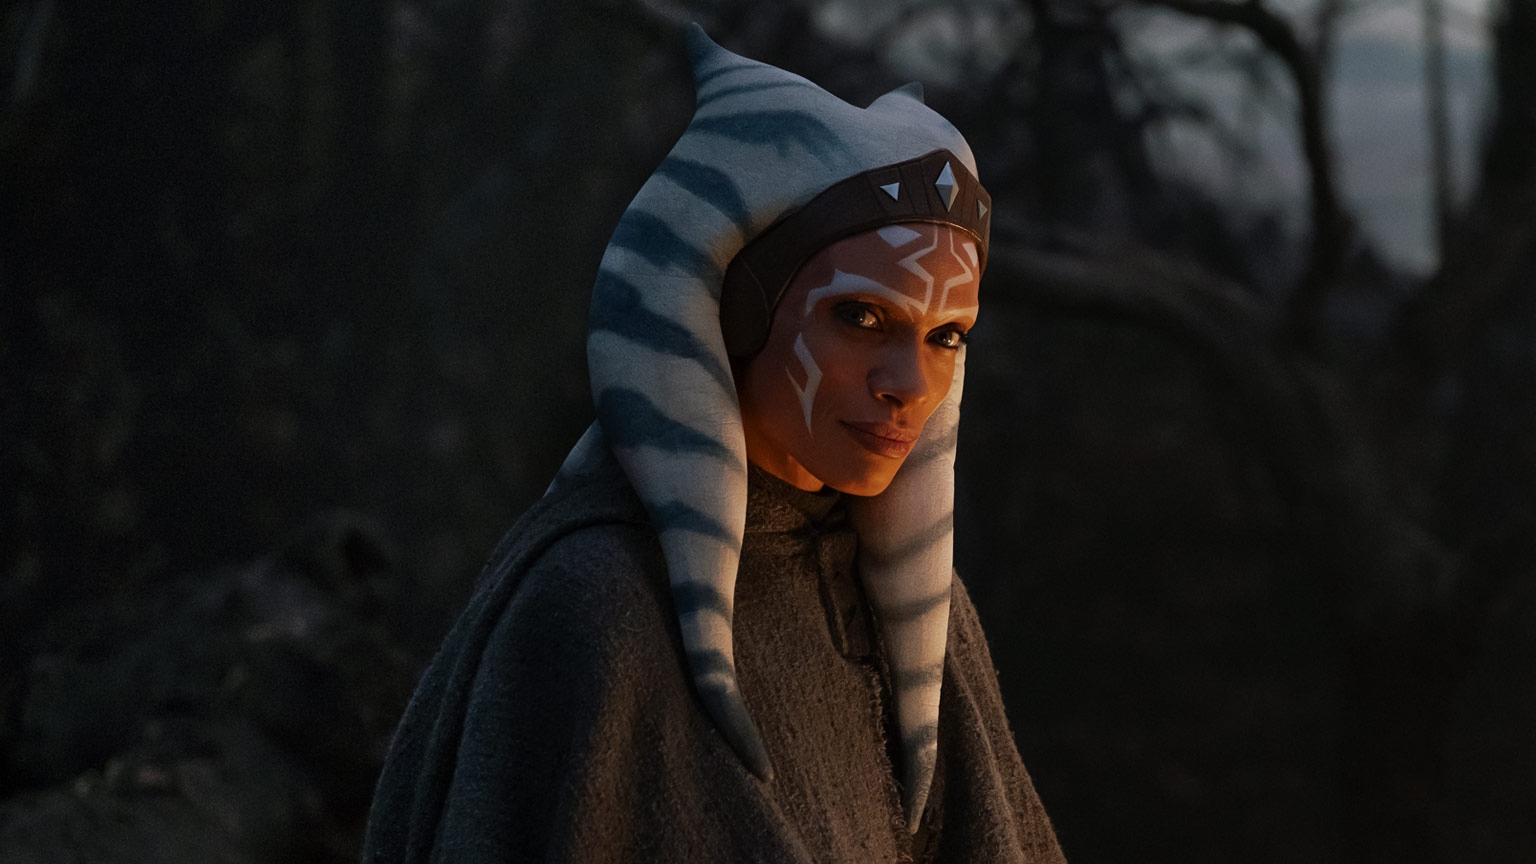 Everything to Know About Disney+’s 'Star Wars' Series About Ahsoka Tano Series Starring Rosario Dawson